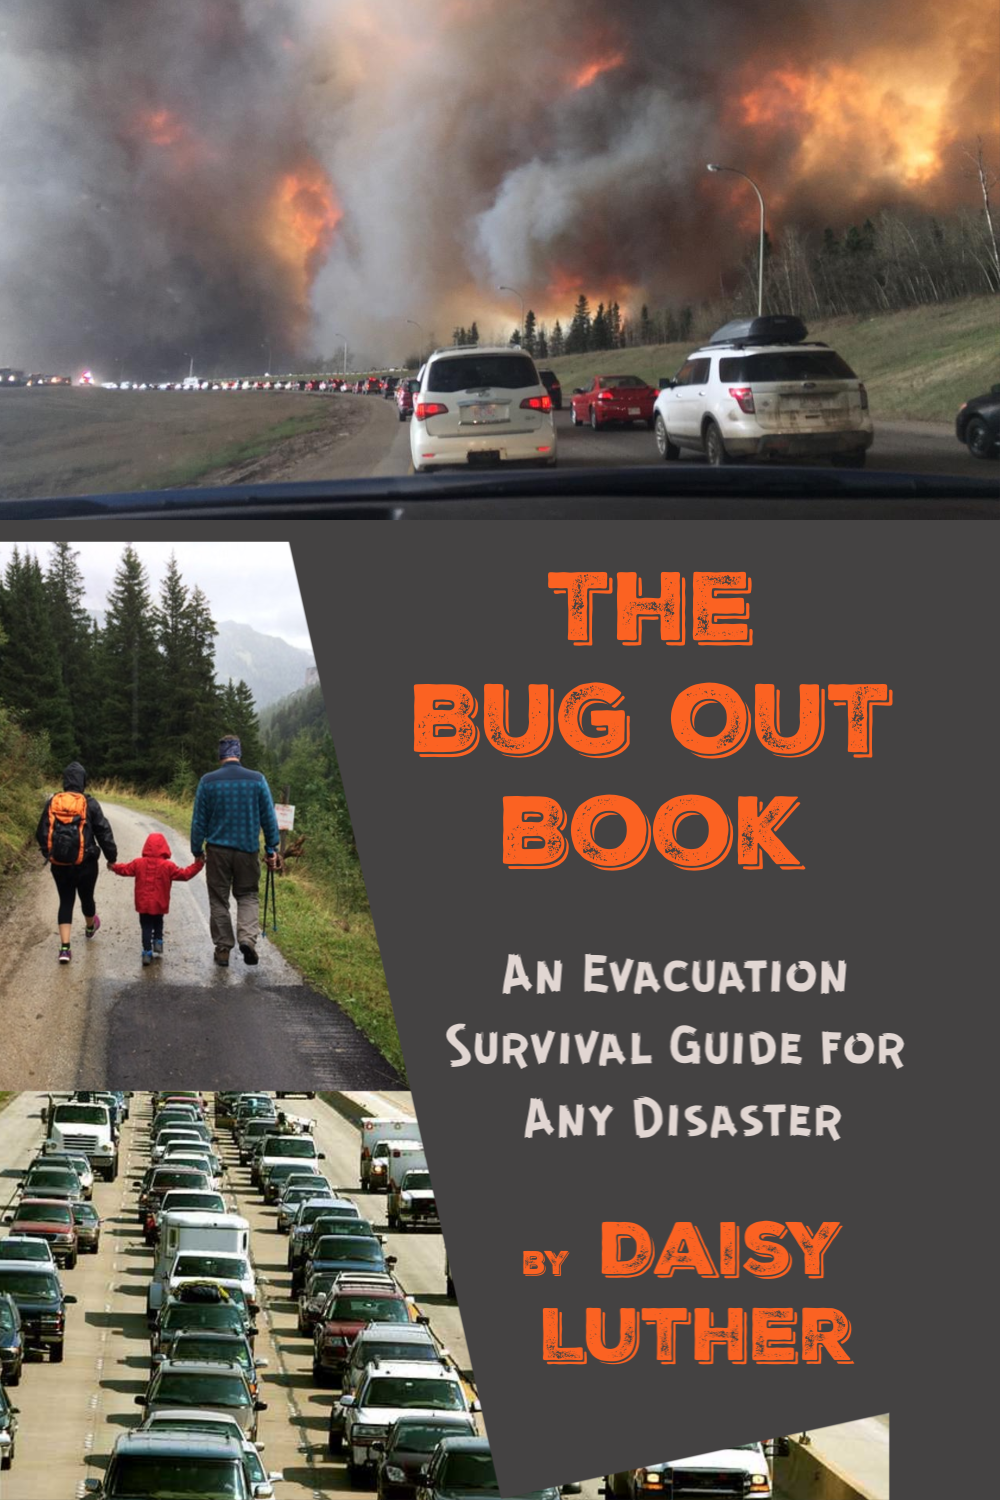 Introducing The Bug Out Book